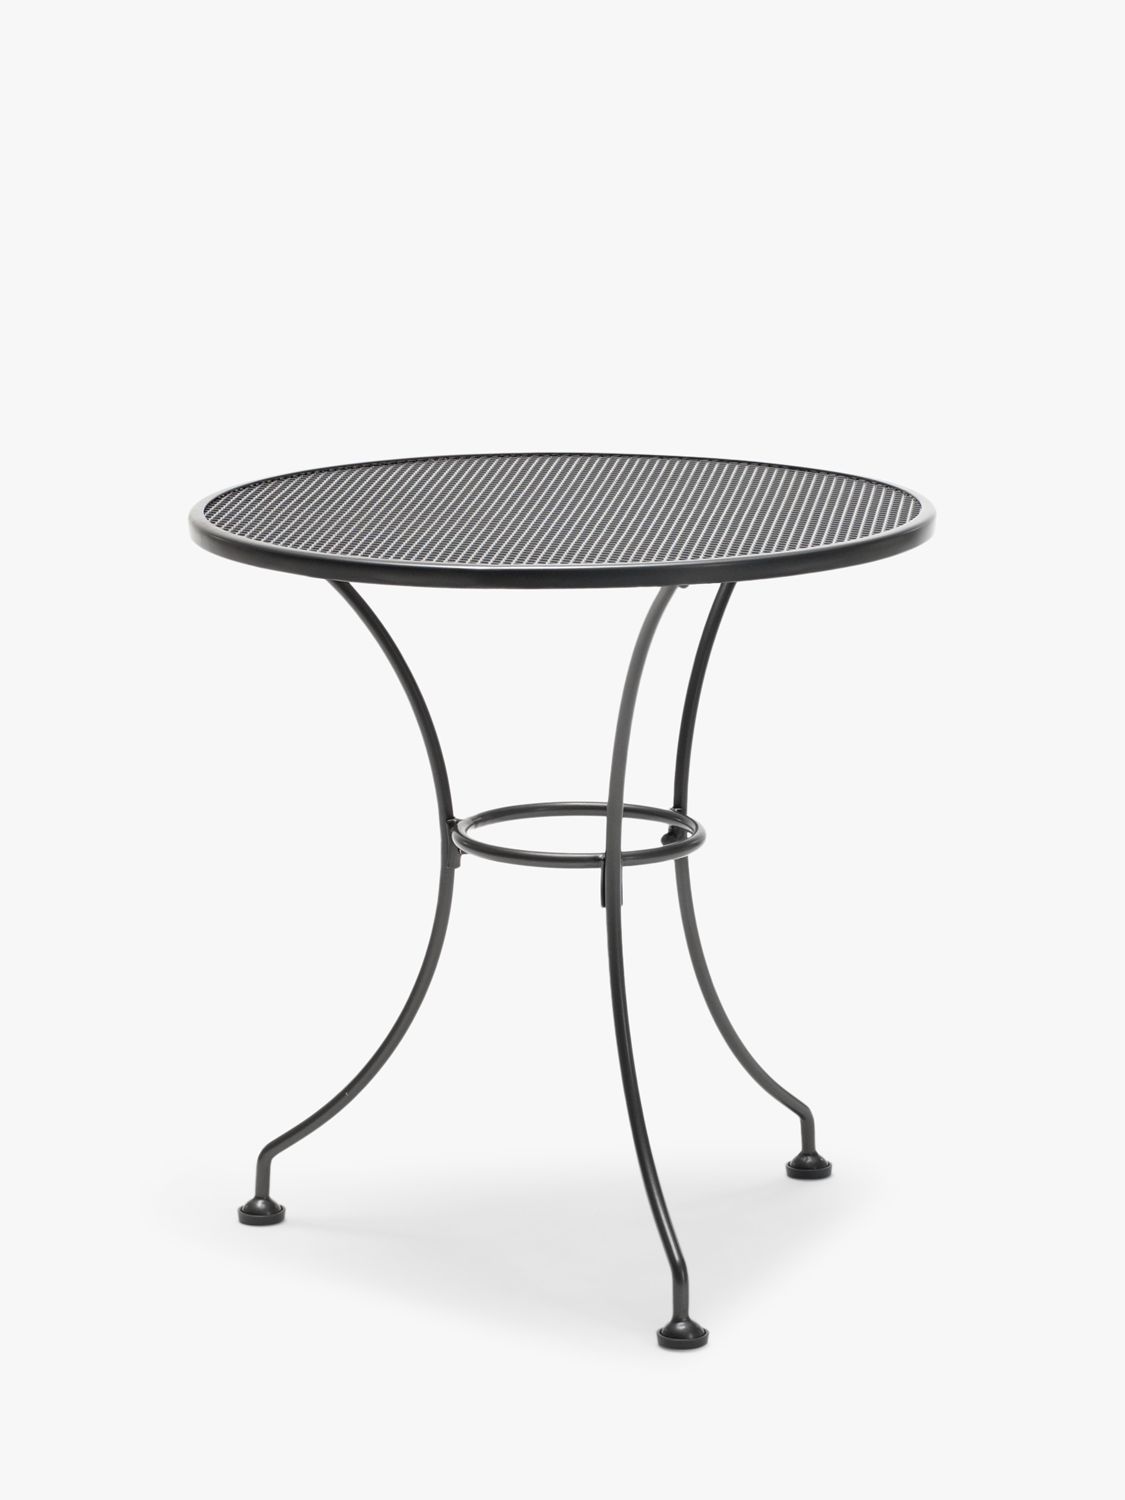 John Lewis Henley by Kettler 2 Seater Round Outdoor Dining Table